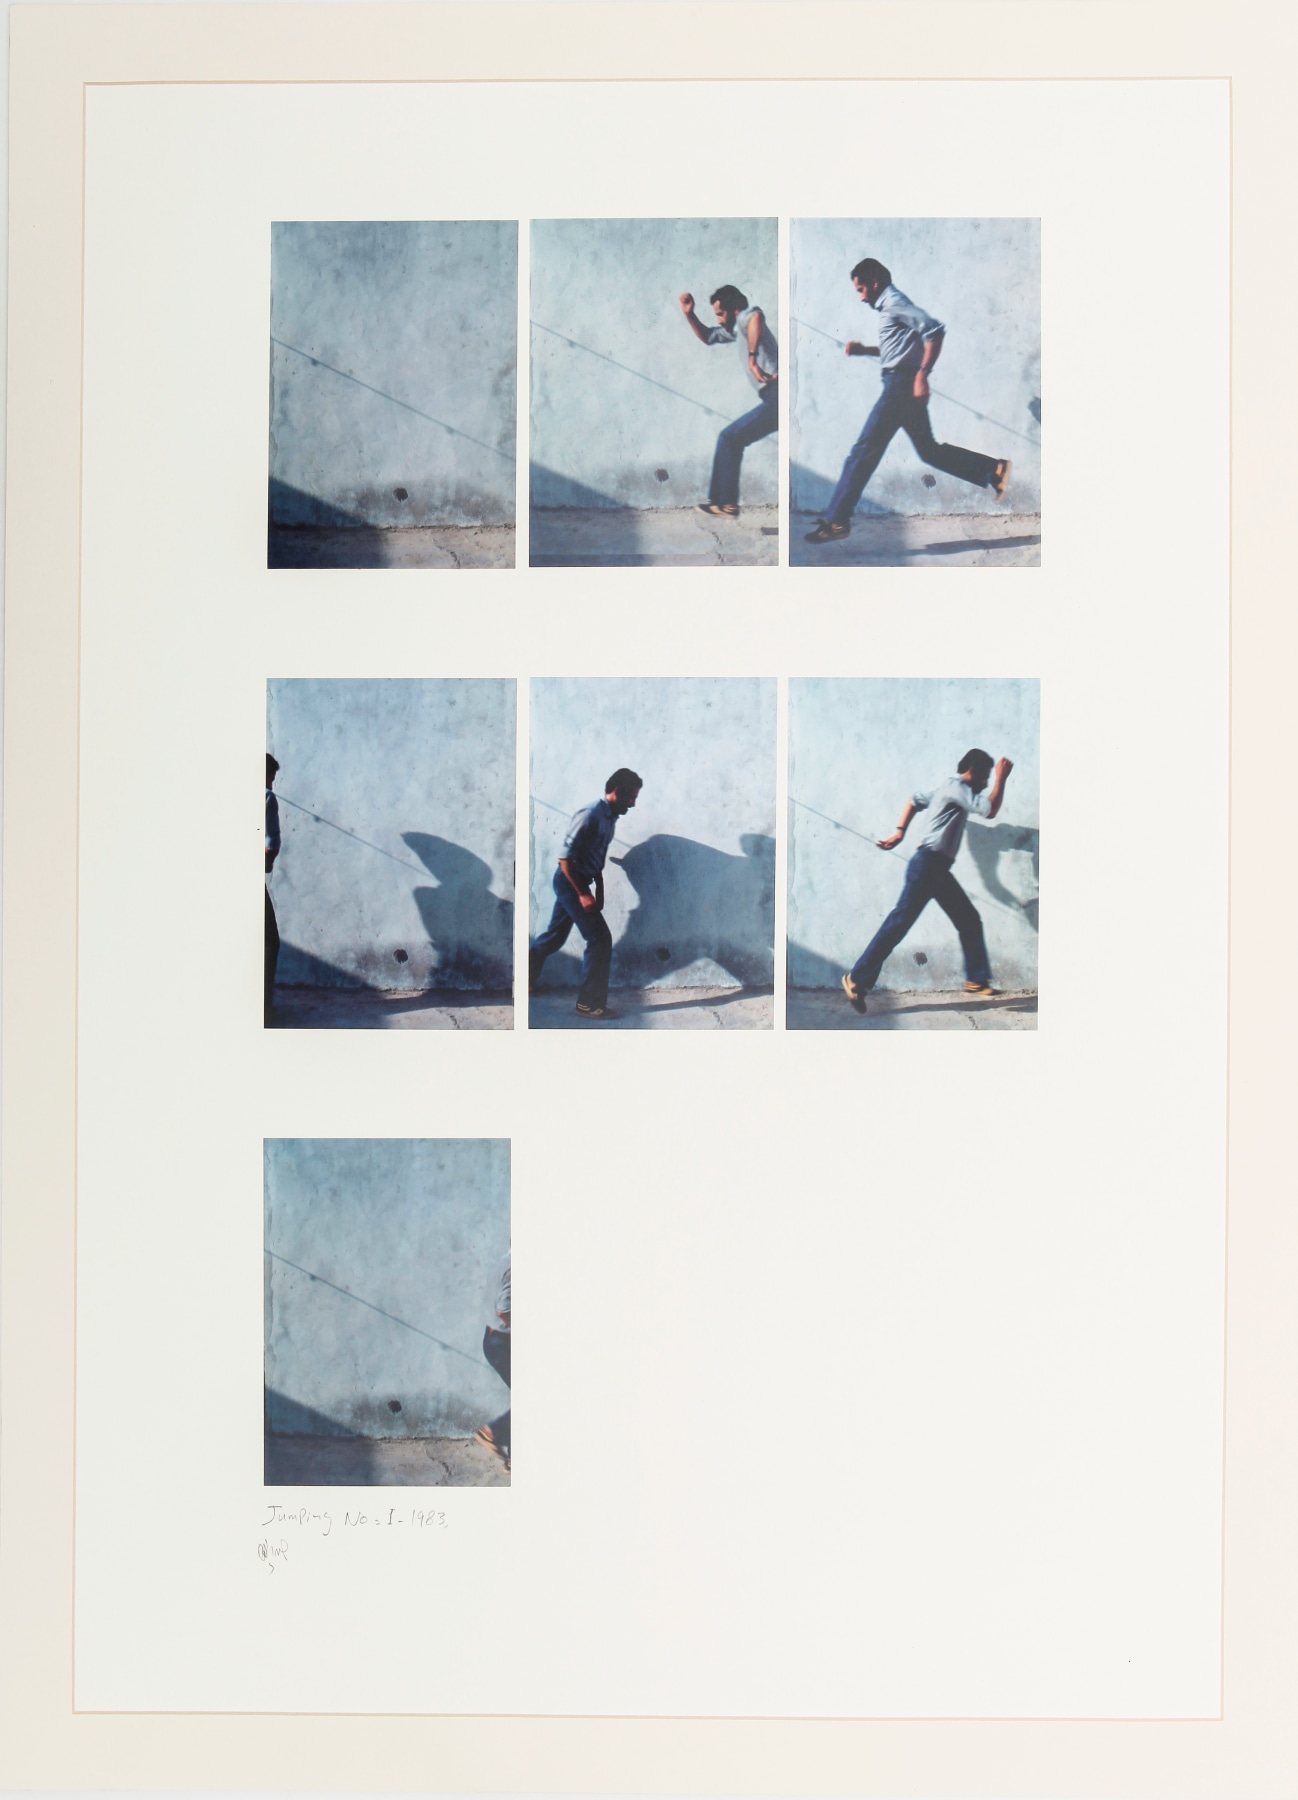 Jumping No. 1, 1983, Photographs mounted on cardboard in 7 parts